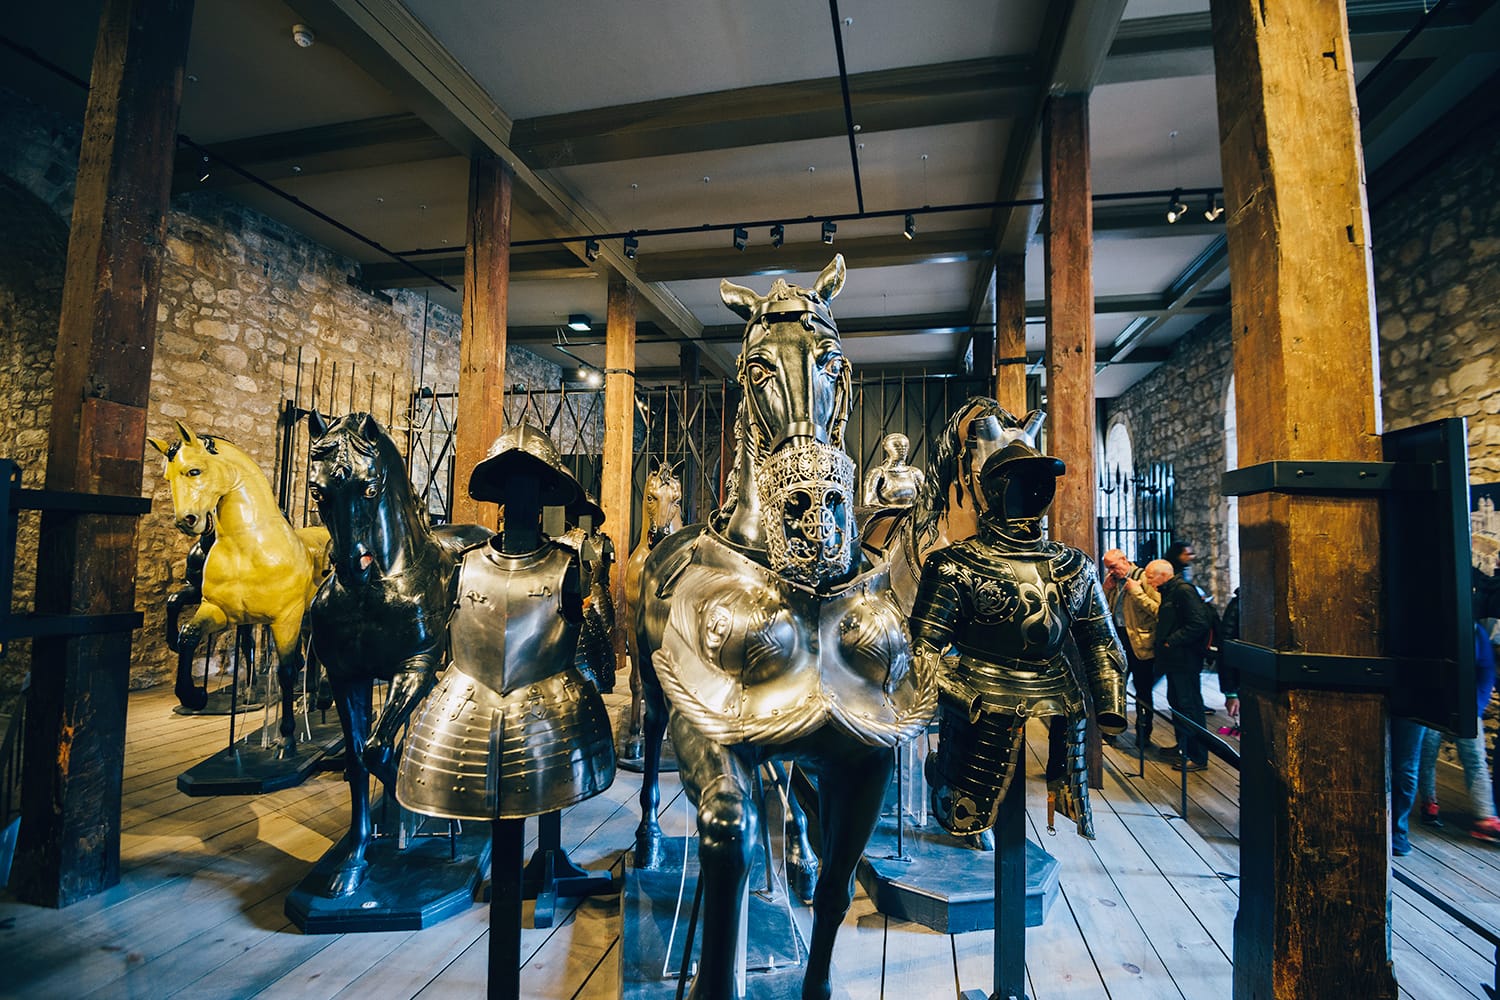 The armoury in the Tower of London